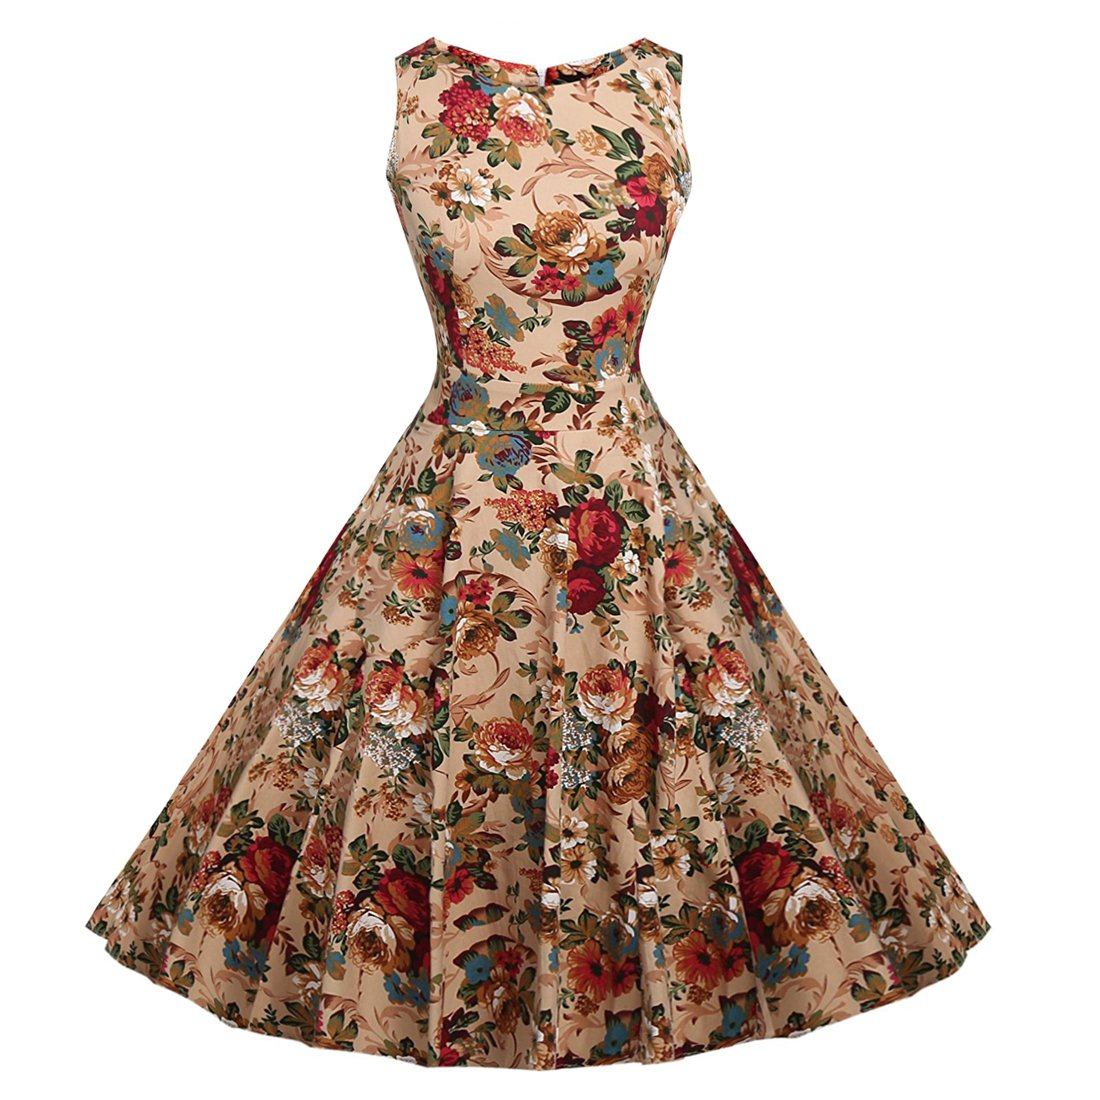 Vintage Classy Floral Sleeveless Party Picnic Party Cocktail Dress